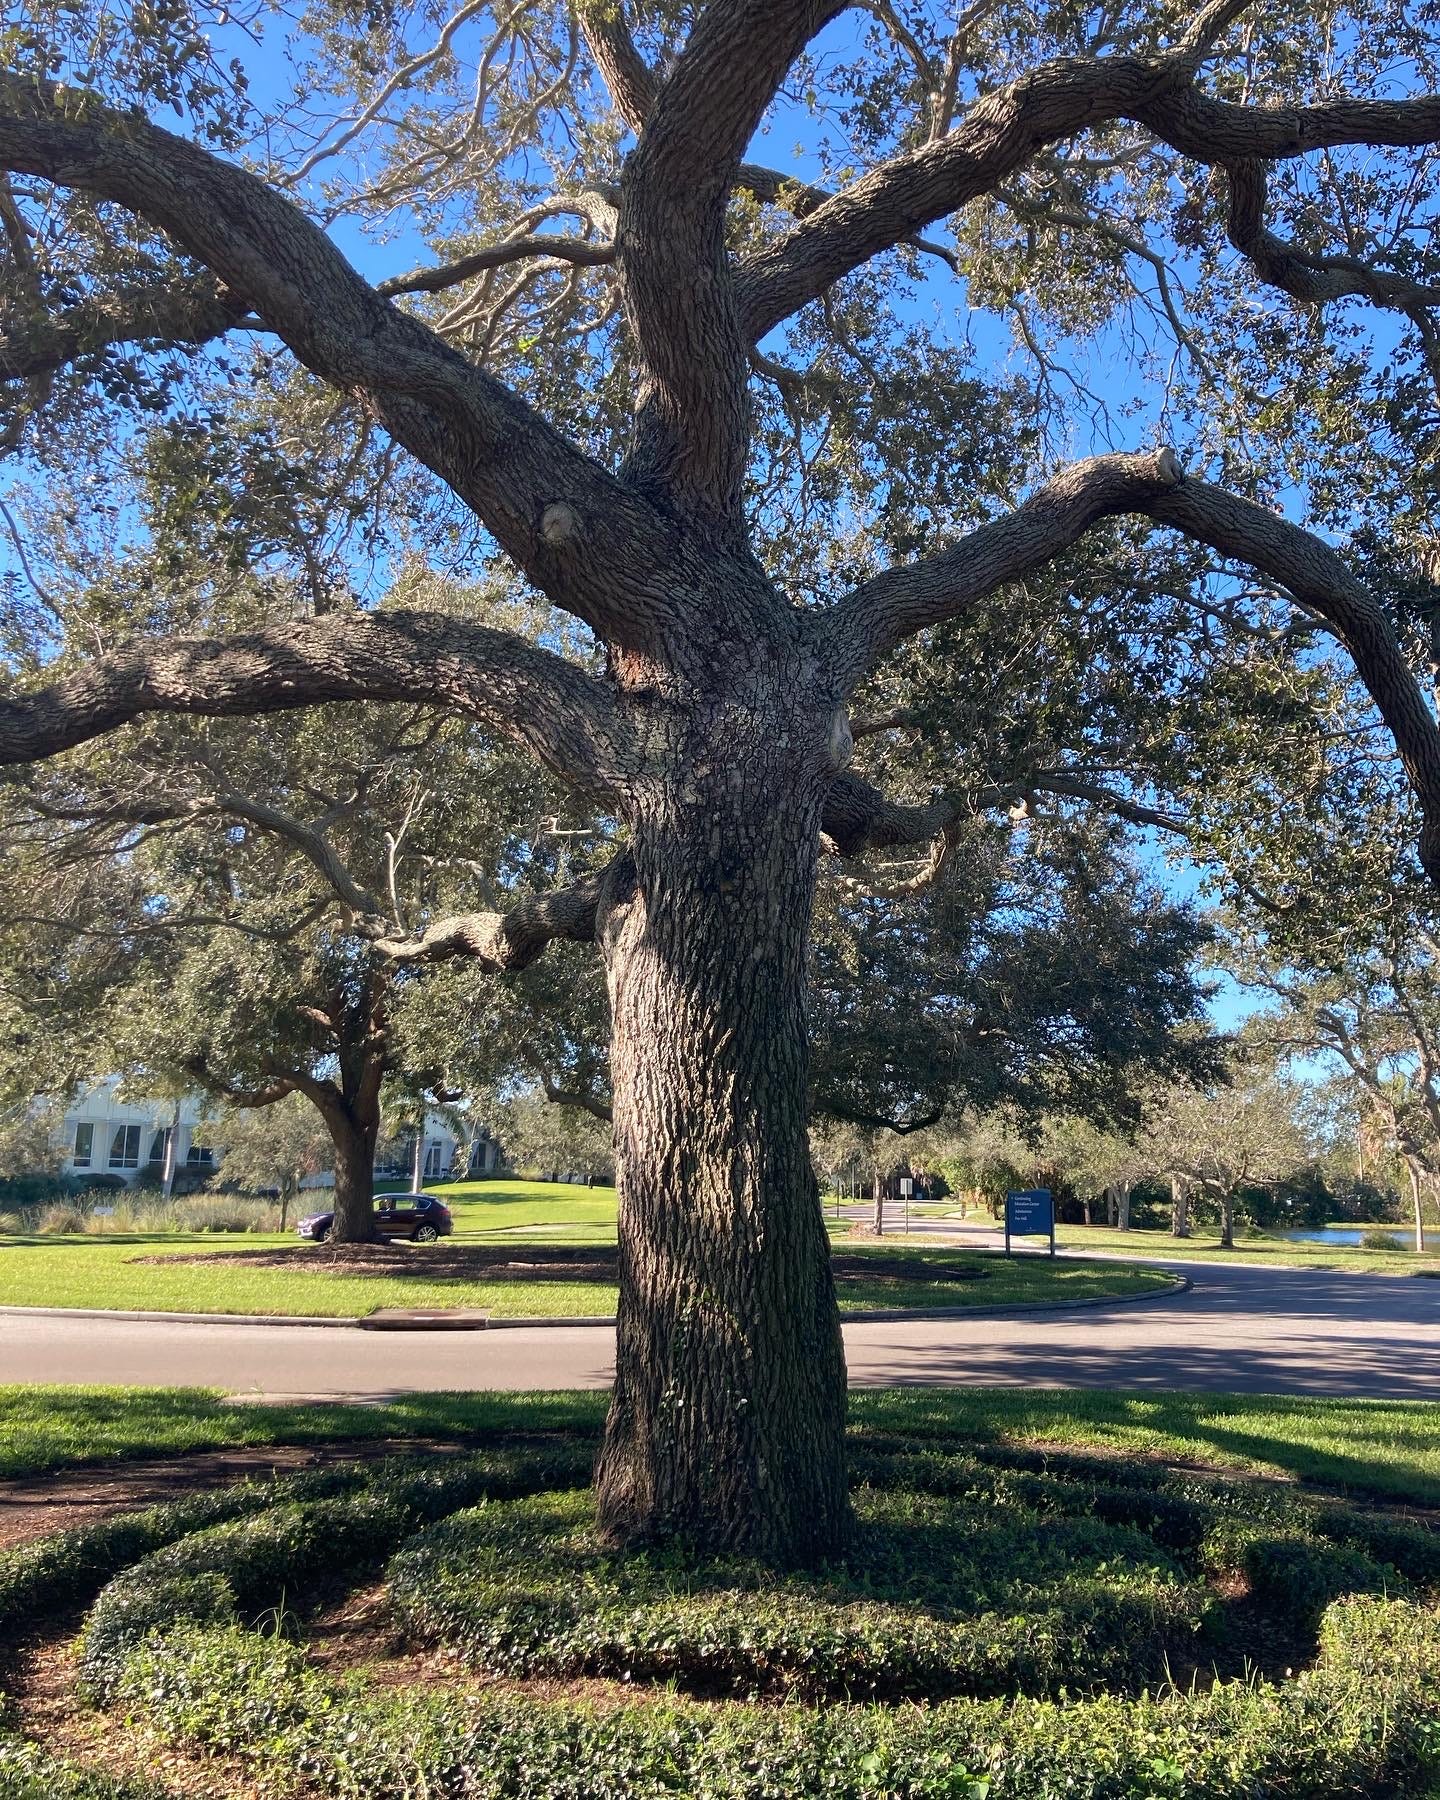 Live oak tress with some spanish moss